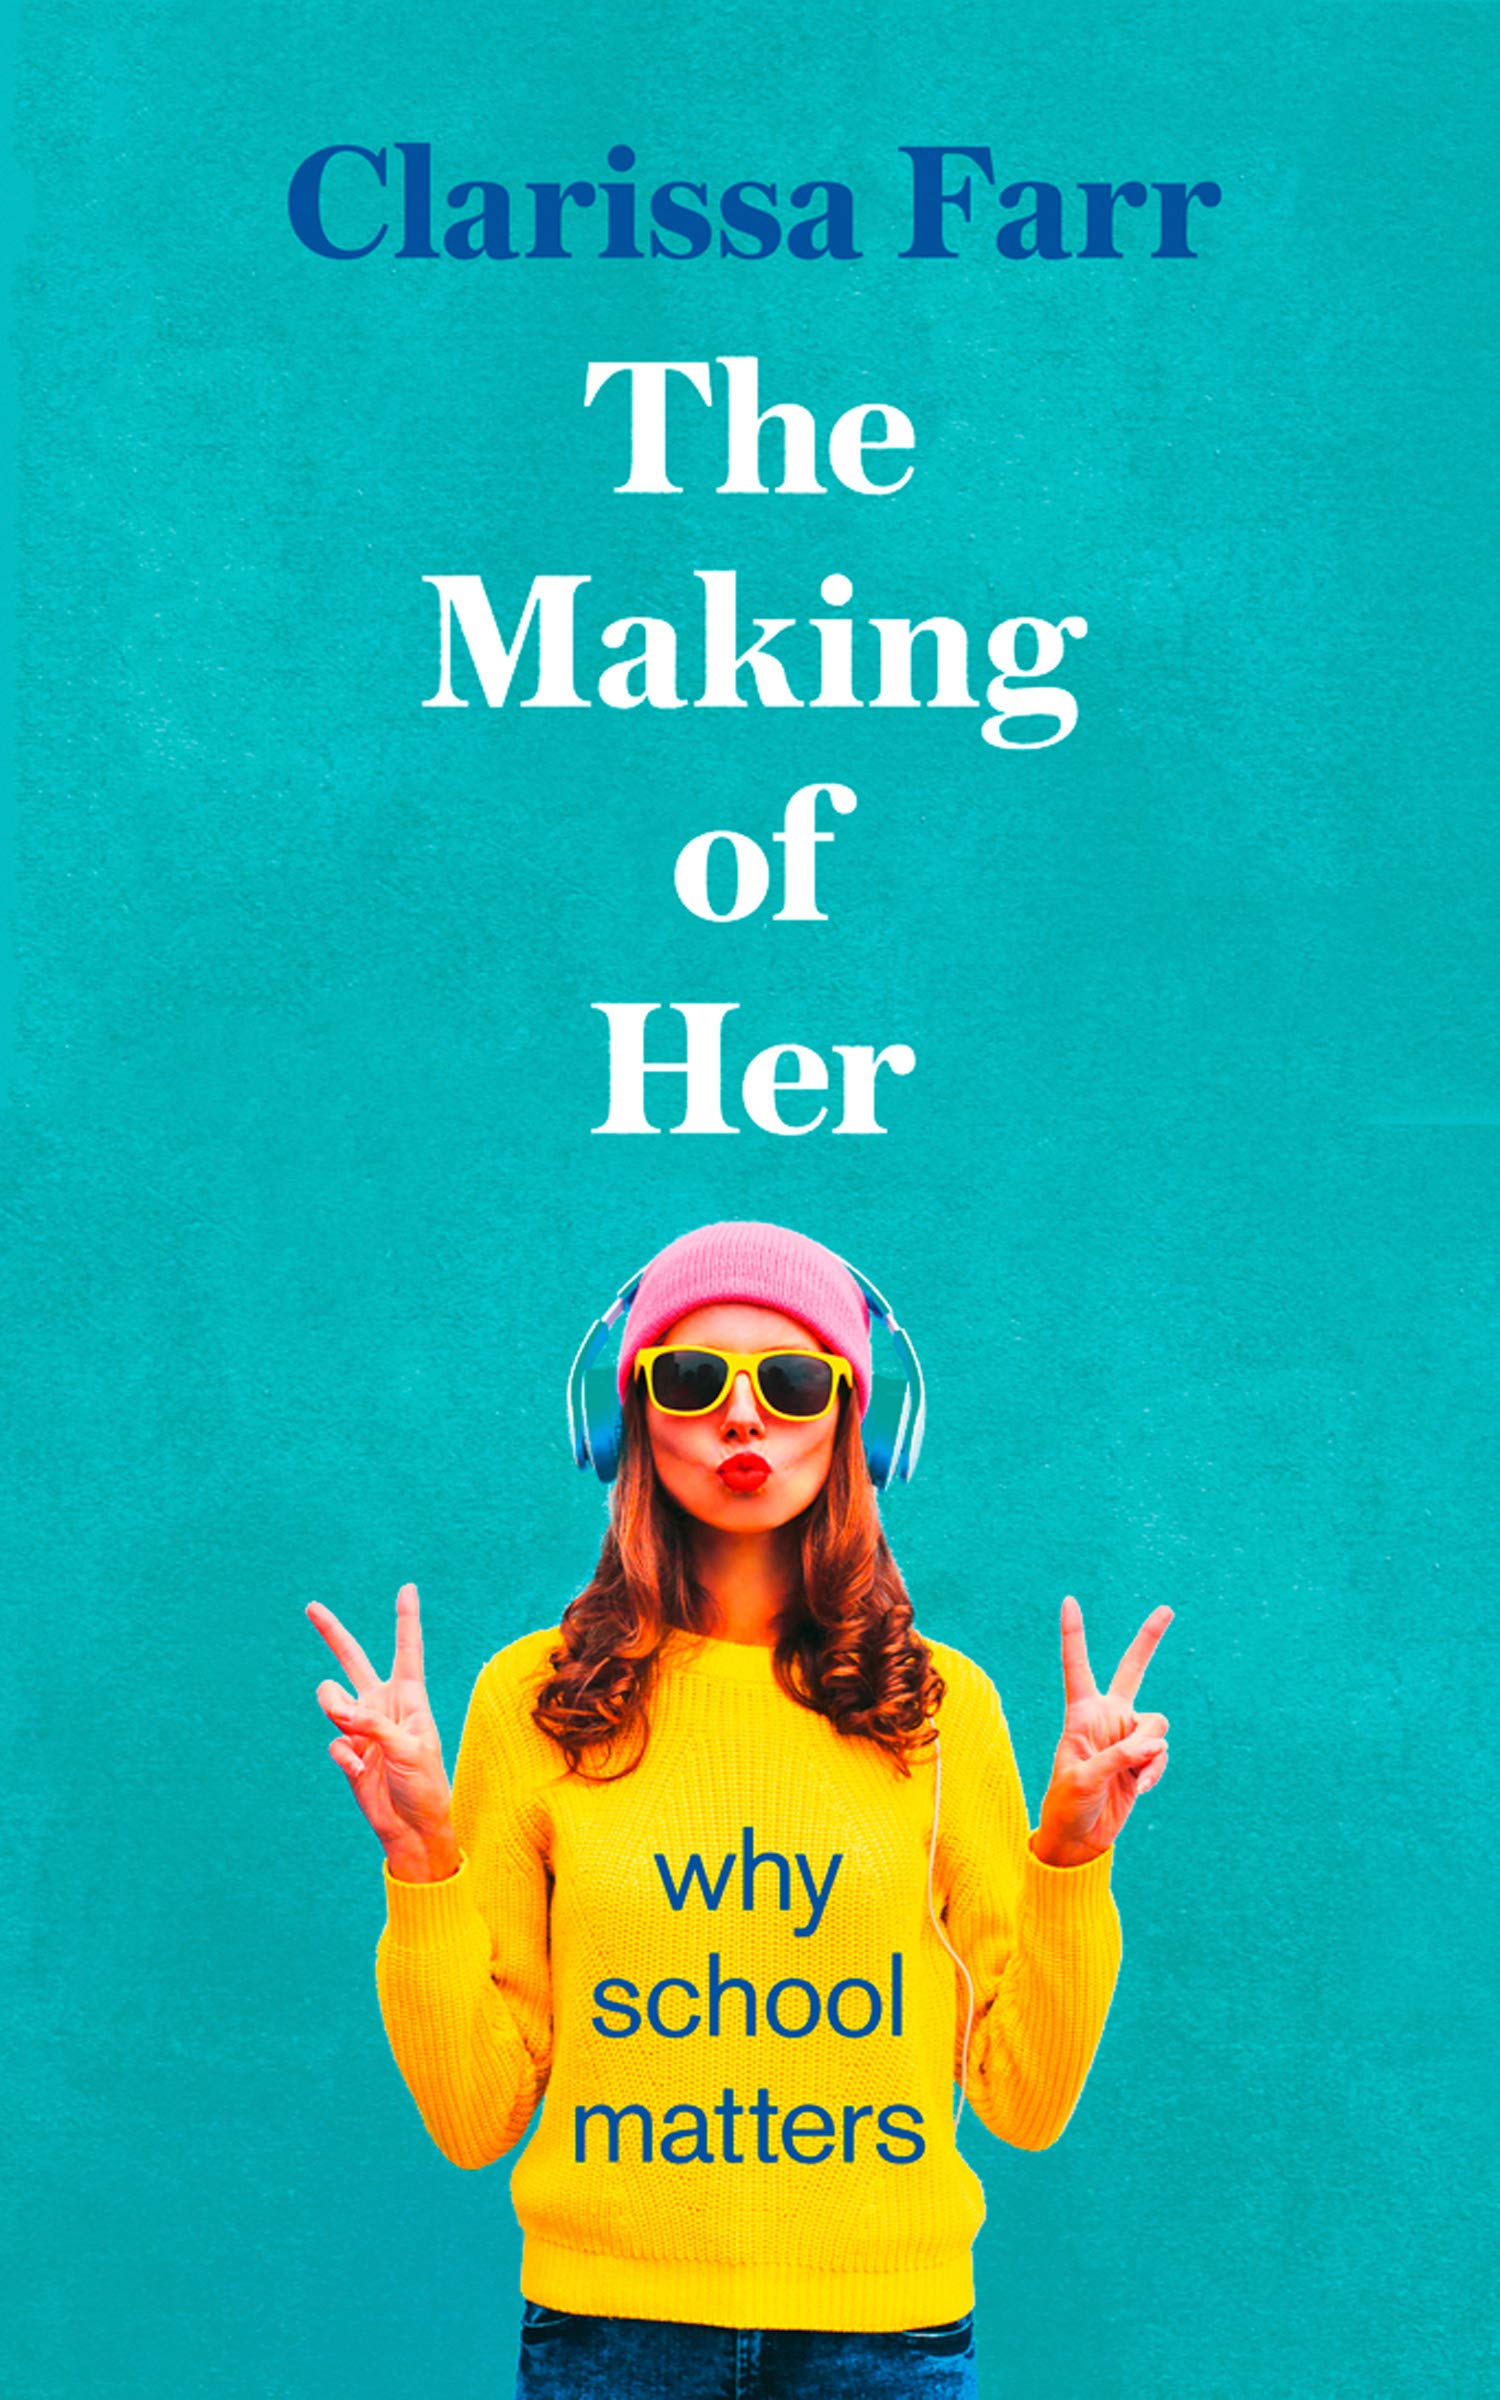 When Does The Making of Her Publish? 2019 Book Release Date